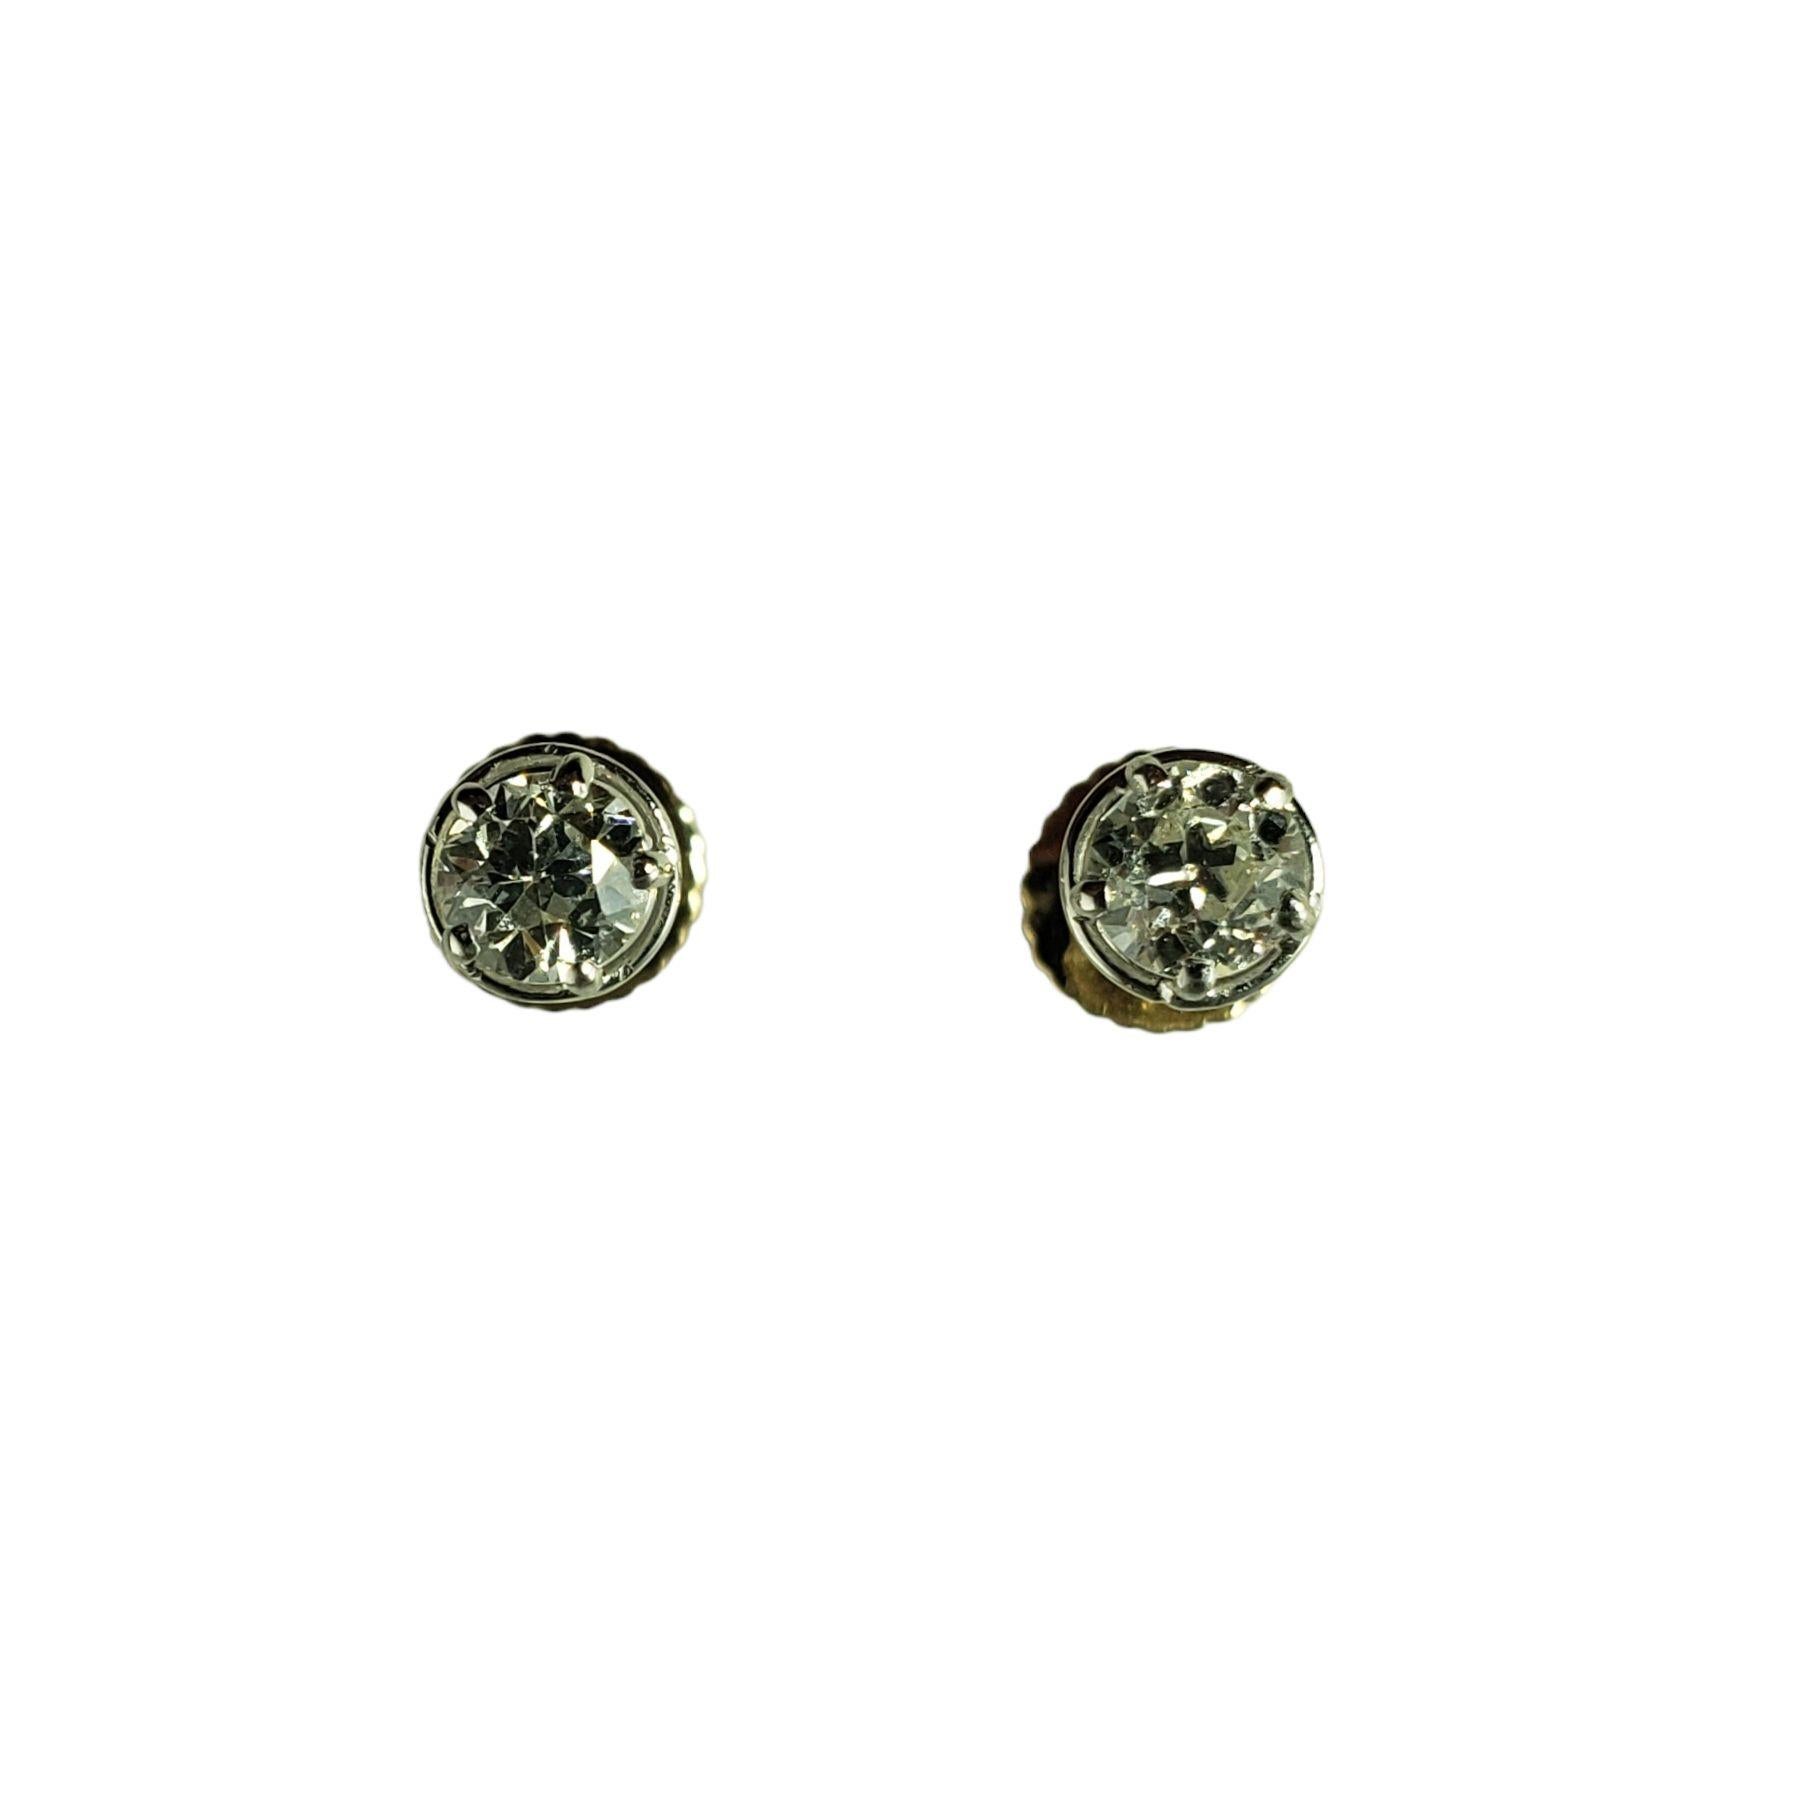 These sparkling stud earrings each feature one European cut diamond set in classic 14K yellow gold.  Screw back closures.

Approximate total diamond weight:  .40 ct.

Diamond color: K

Diamond clarity: SI1

Size: 5 mm

Weight:  1.0 gr./  0.6